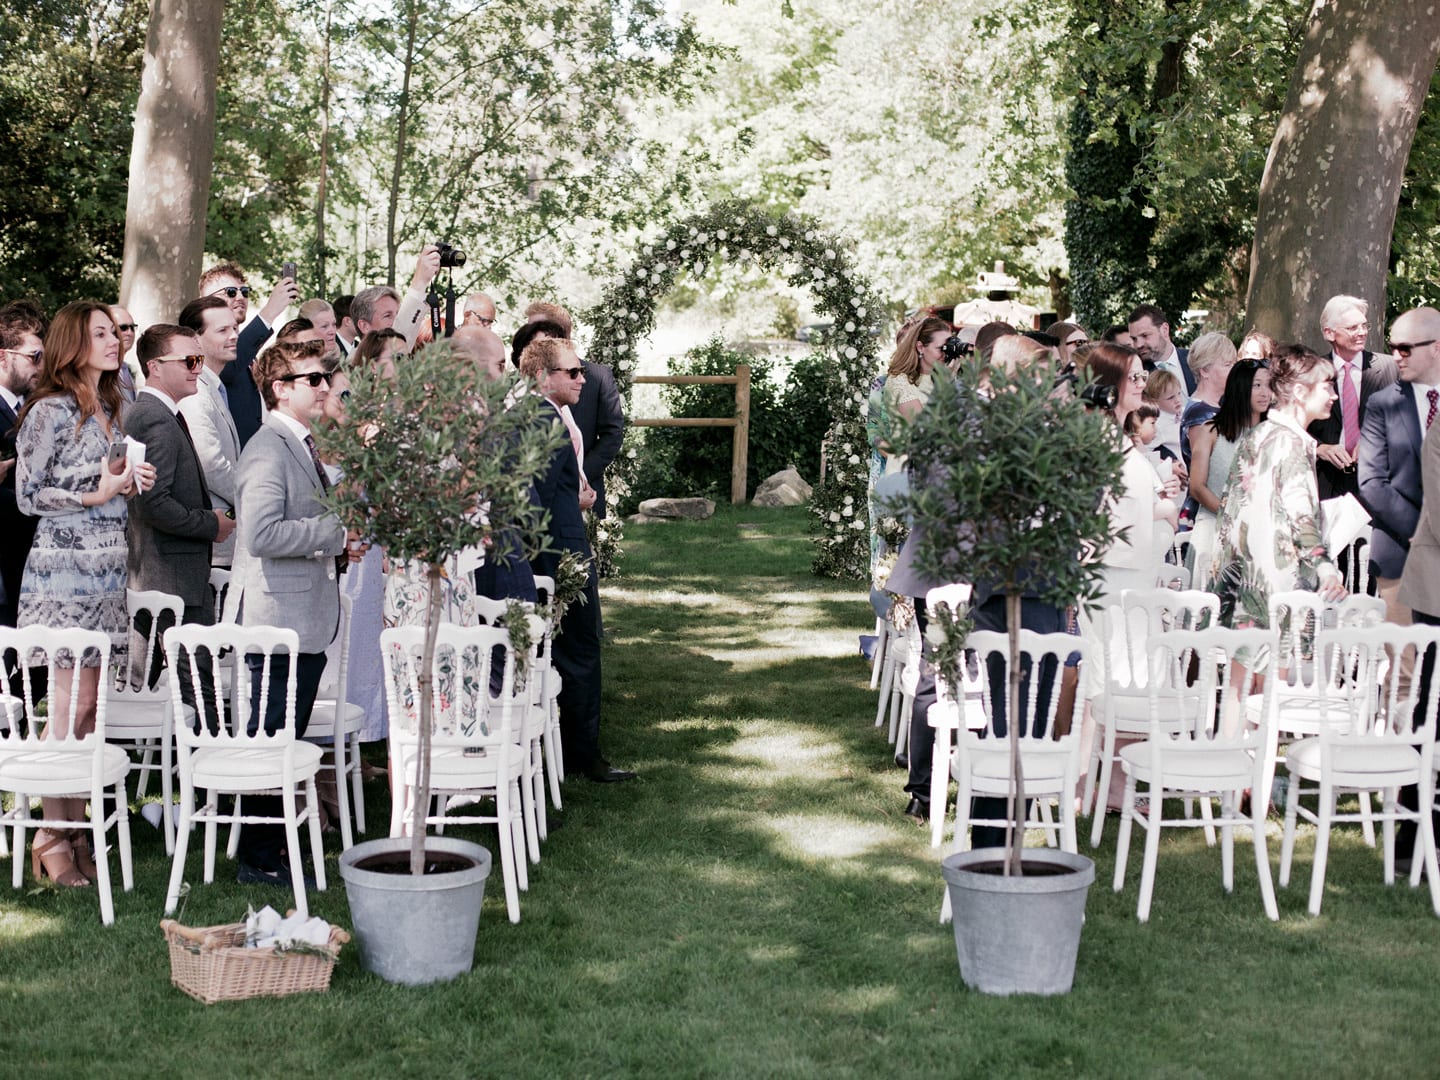 The aisle and rose arch